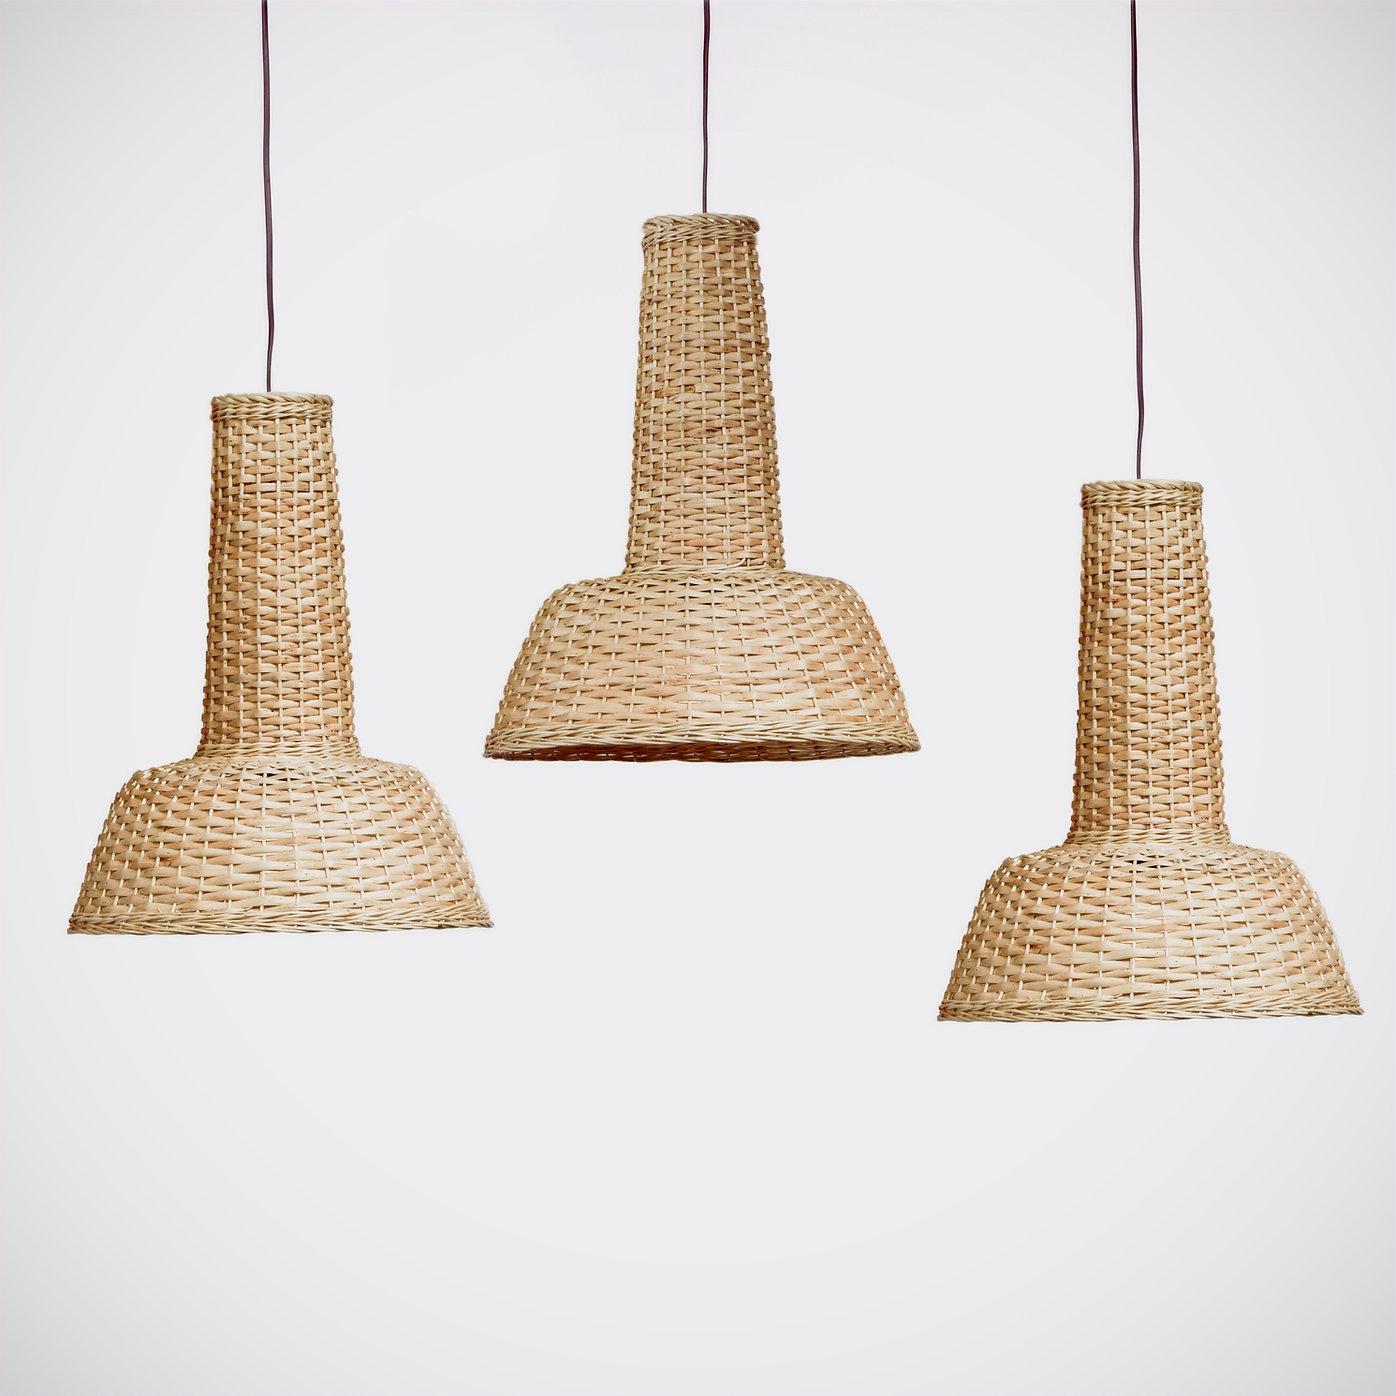 Set of 3 Pendant lamps by Faina
Design: Victoriya Yakusha
Materials: Willow Vine, Steel Frame
Dimensions: D 37 x H 44 cm


The light of lamps is leaking through the patterns of the willow vine, pouring the heat of the Ukrainian village to the